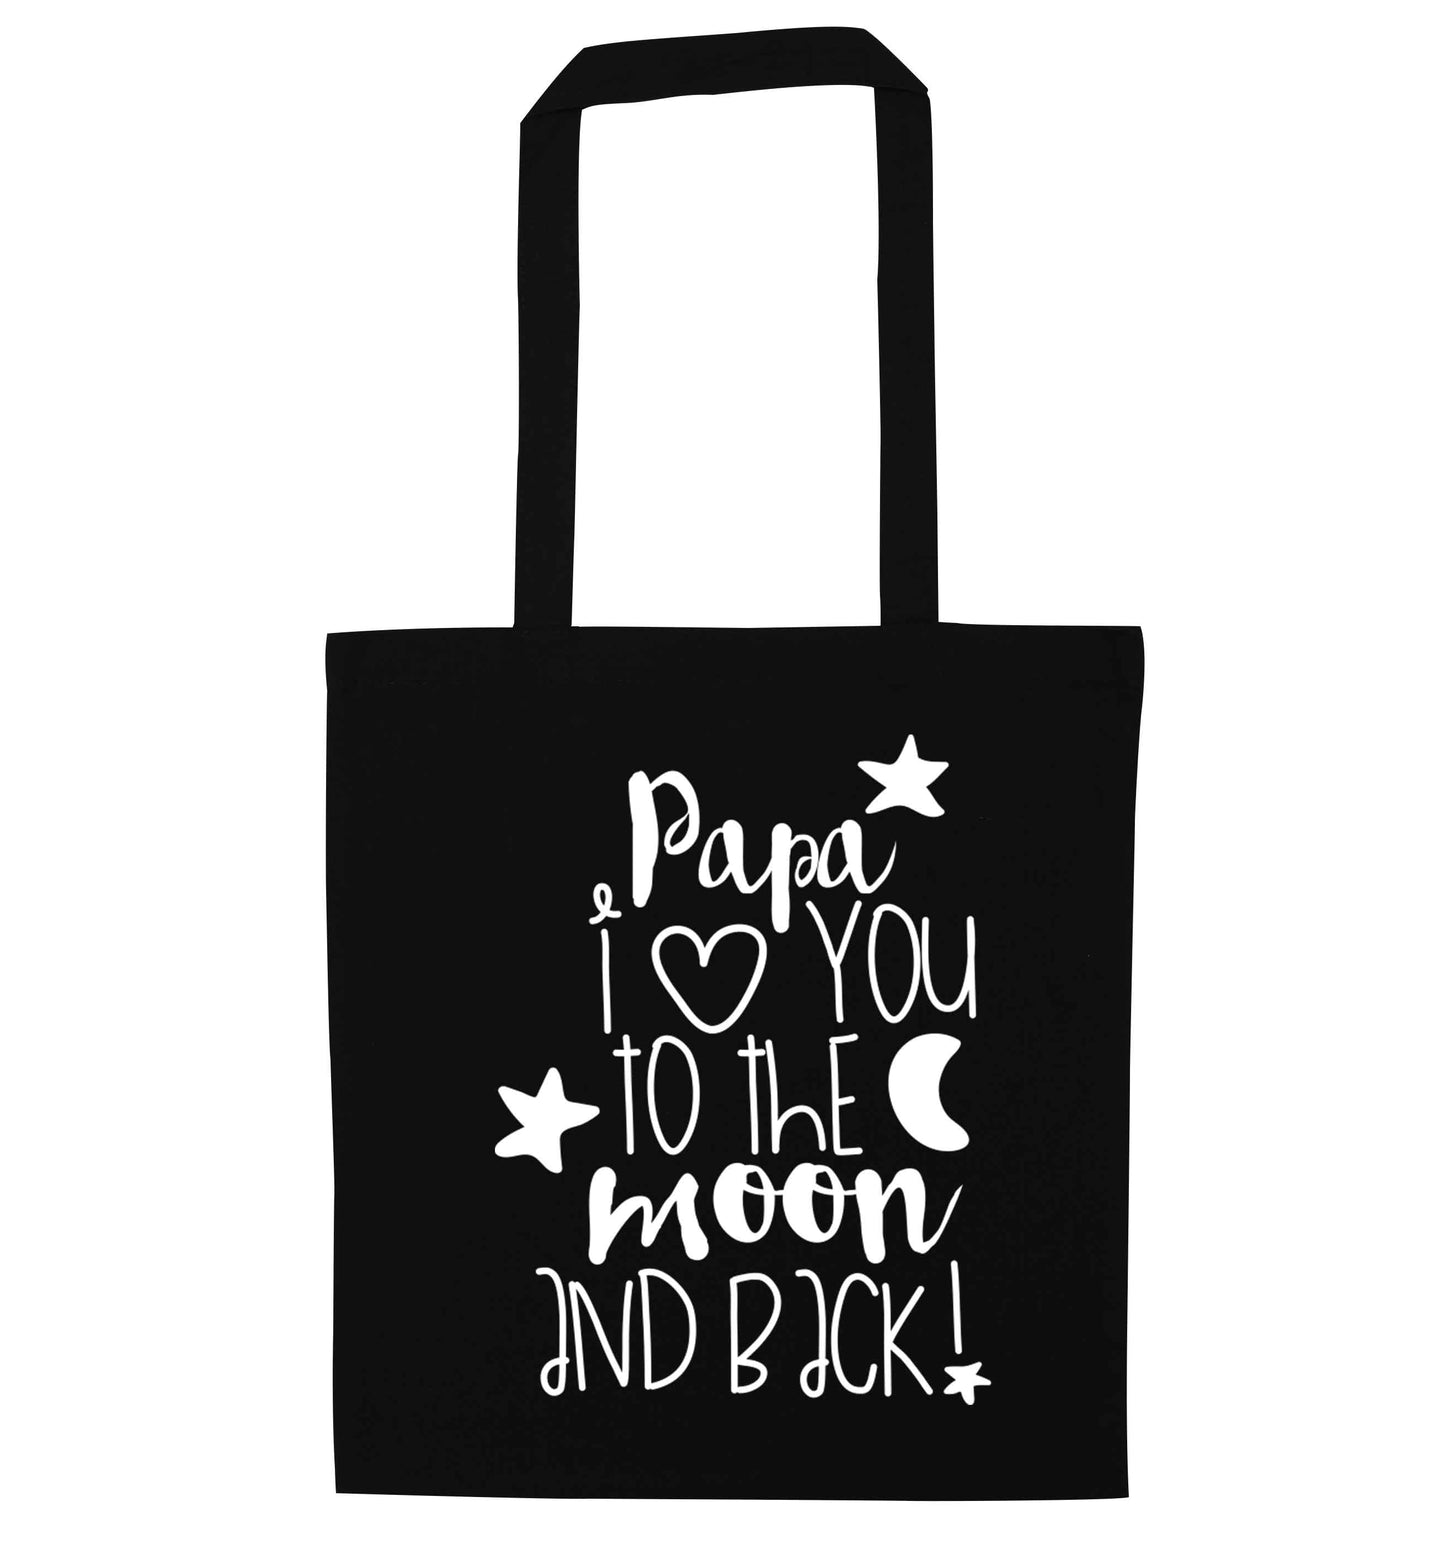 Papa I love you to the moon and back black tote bag